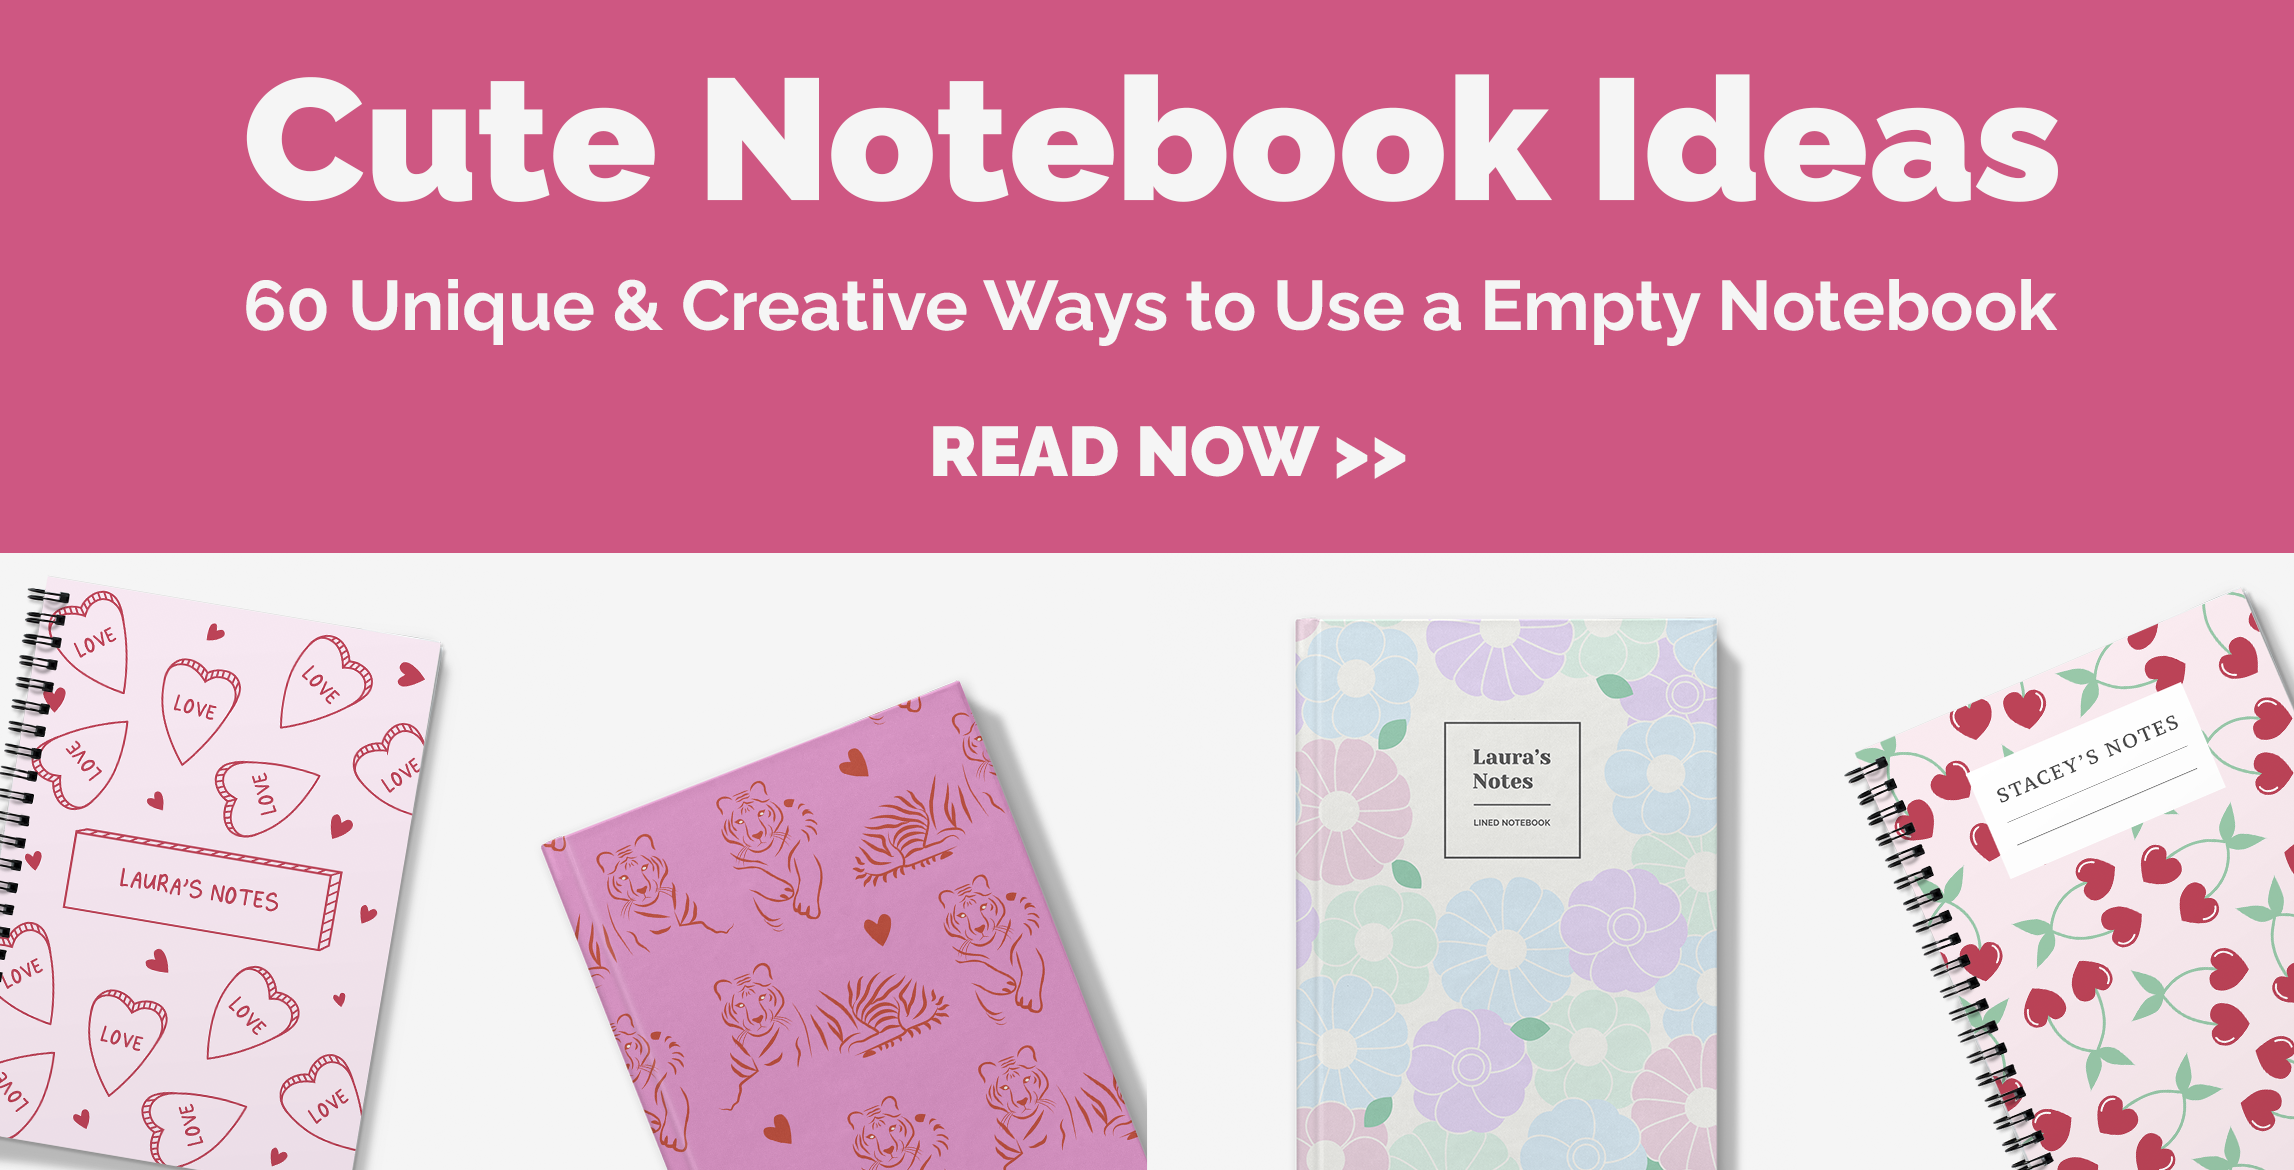 Cute Notebook Ideas: 60 Unique & Creative Ways to Use a Empty Notebook